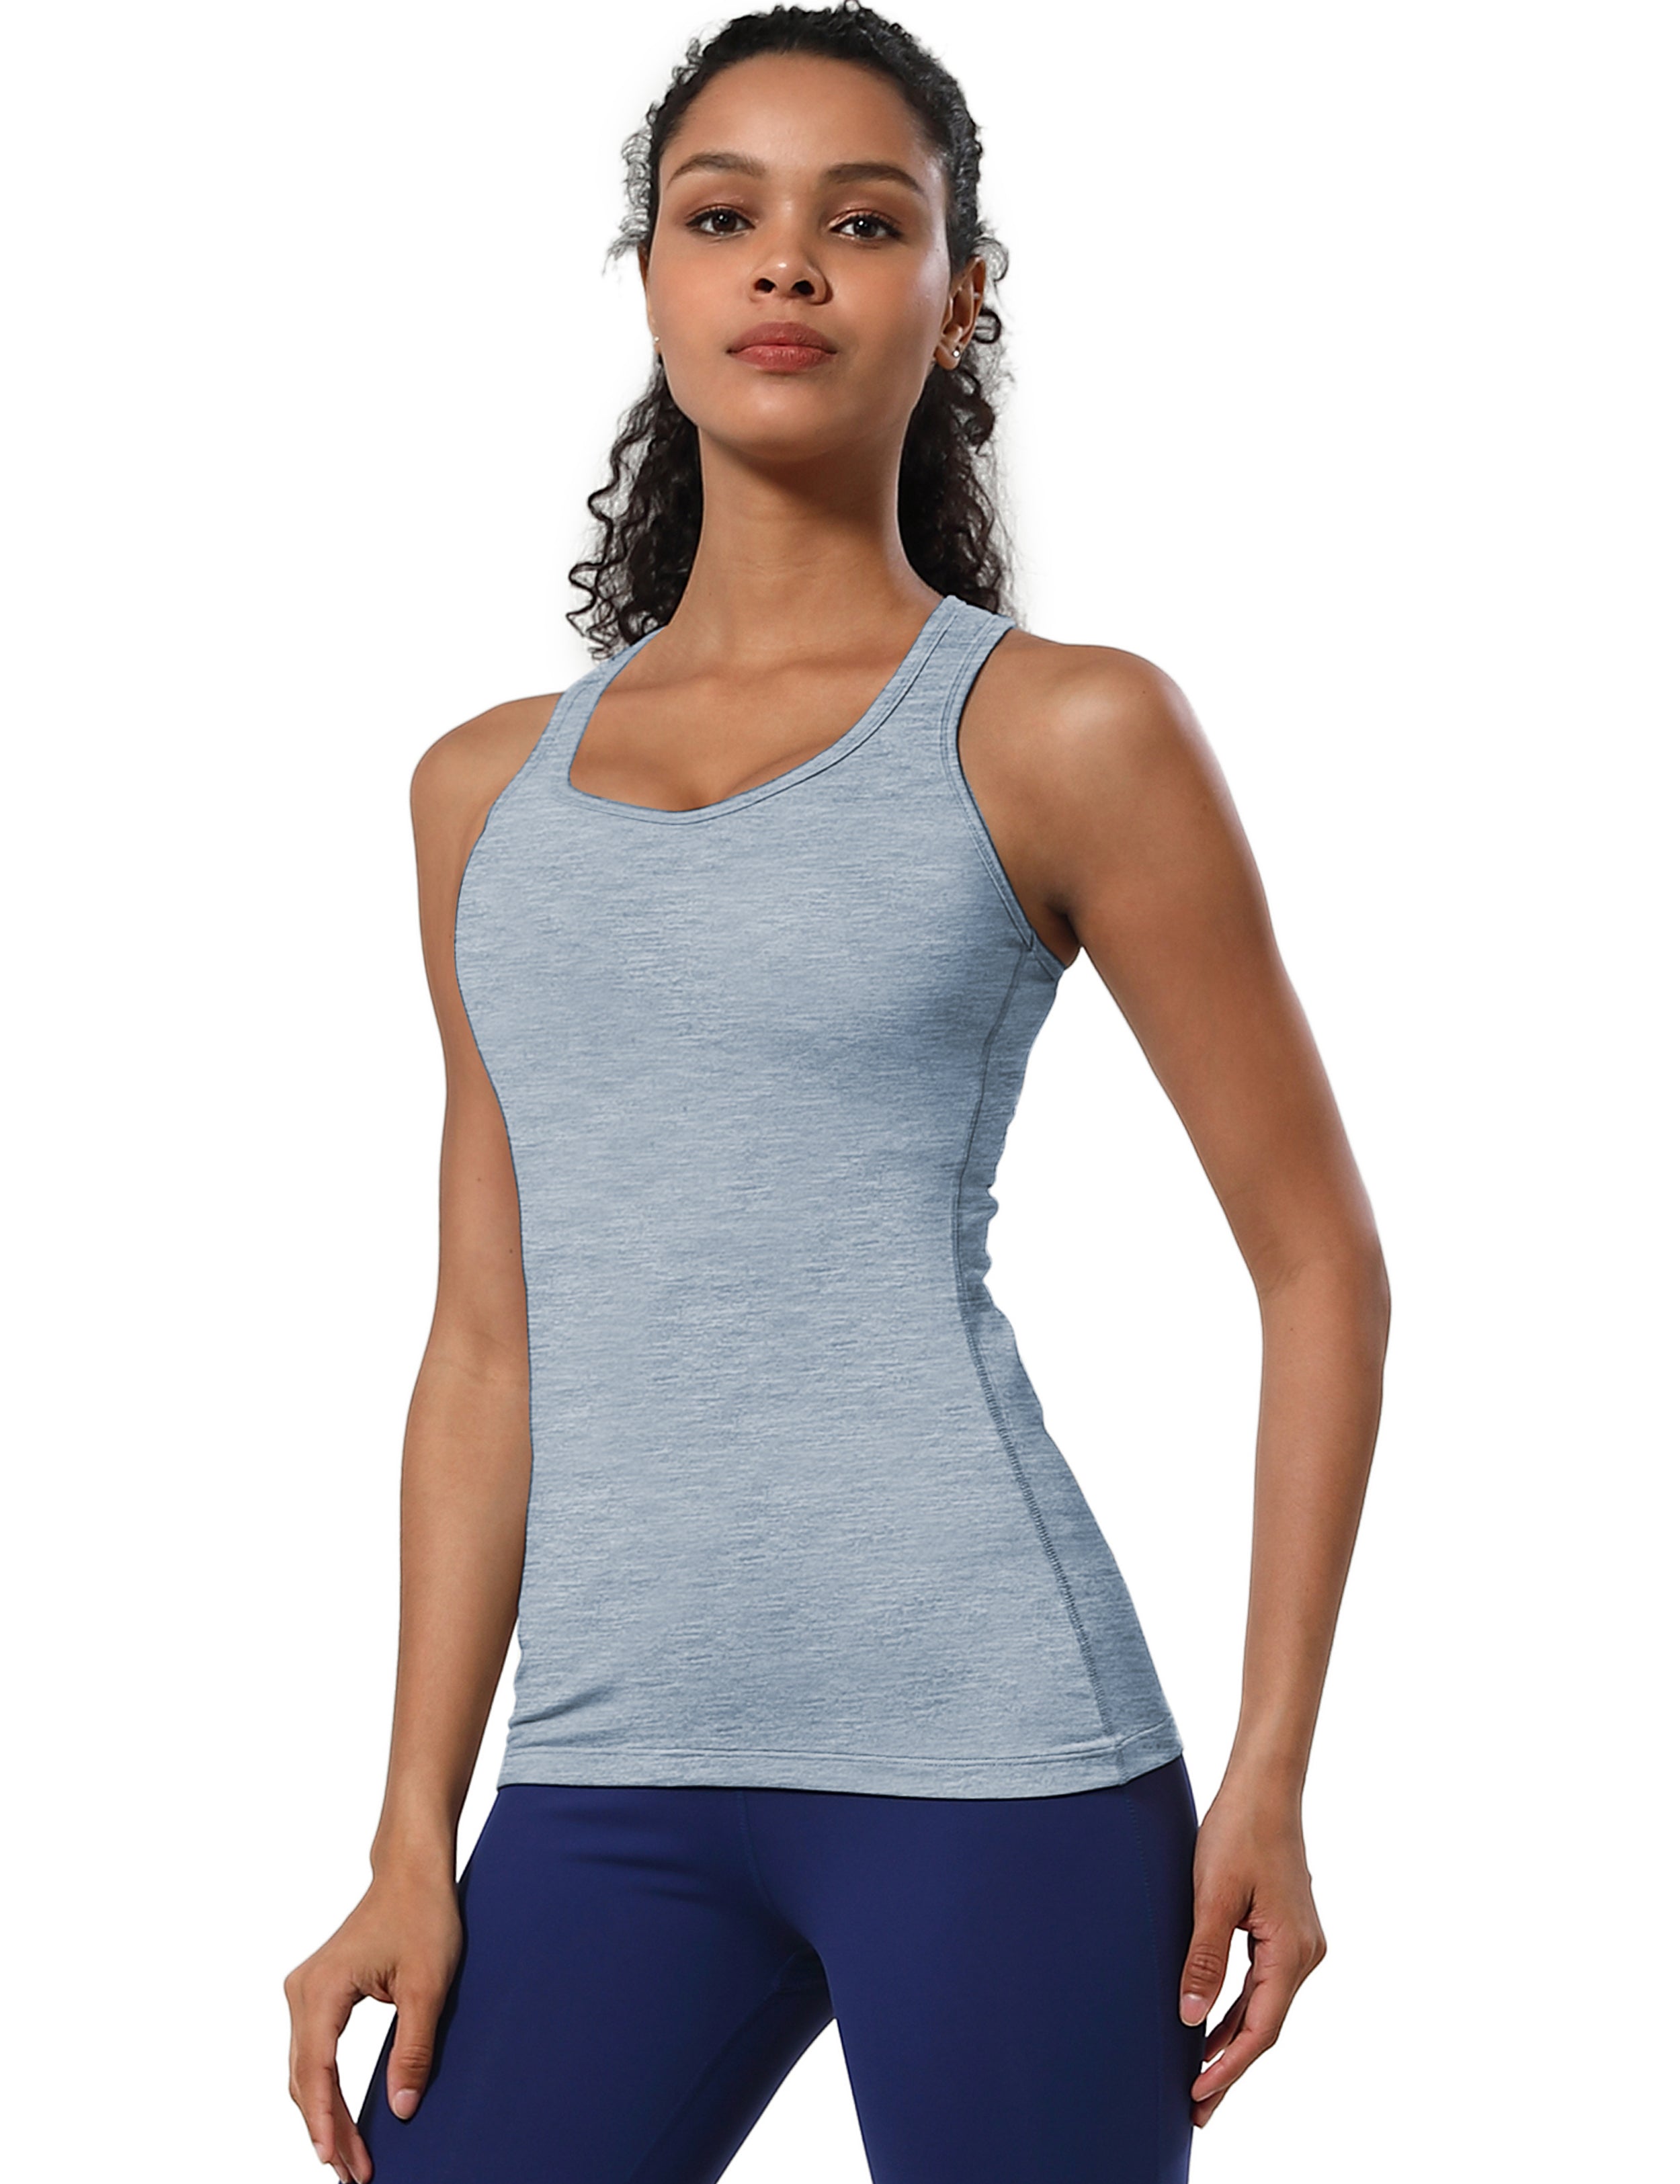 Racerback Athletic Tank Tops heatherblue 92%Nylon/8%Spandex(Cotton Soft) Designed for Jogging Tight Fit So buttery soft, it feels weightless Sweat-wicking Four-way stretch Breathable Contours your body Sits below the waistband for moderate, everyday coverage